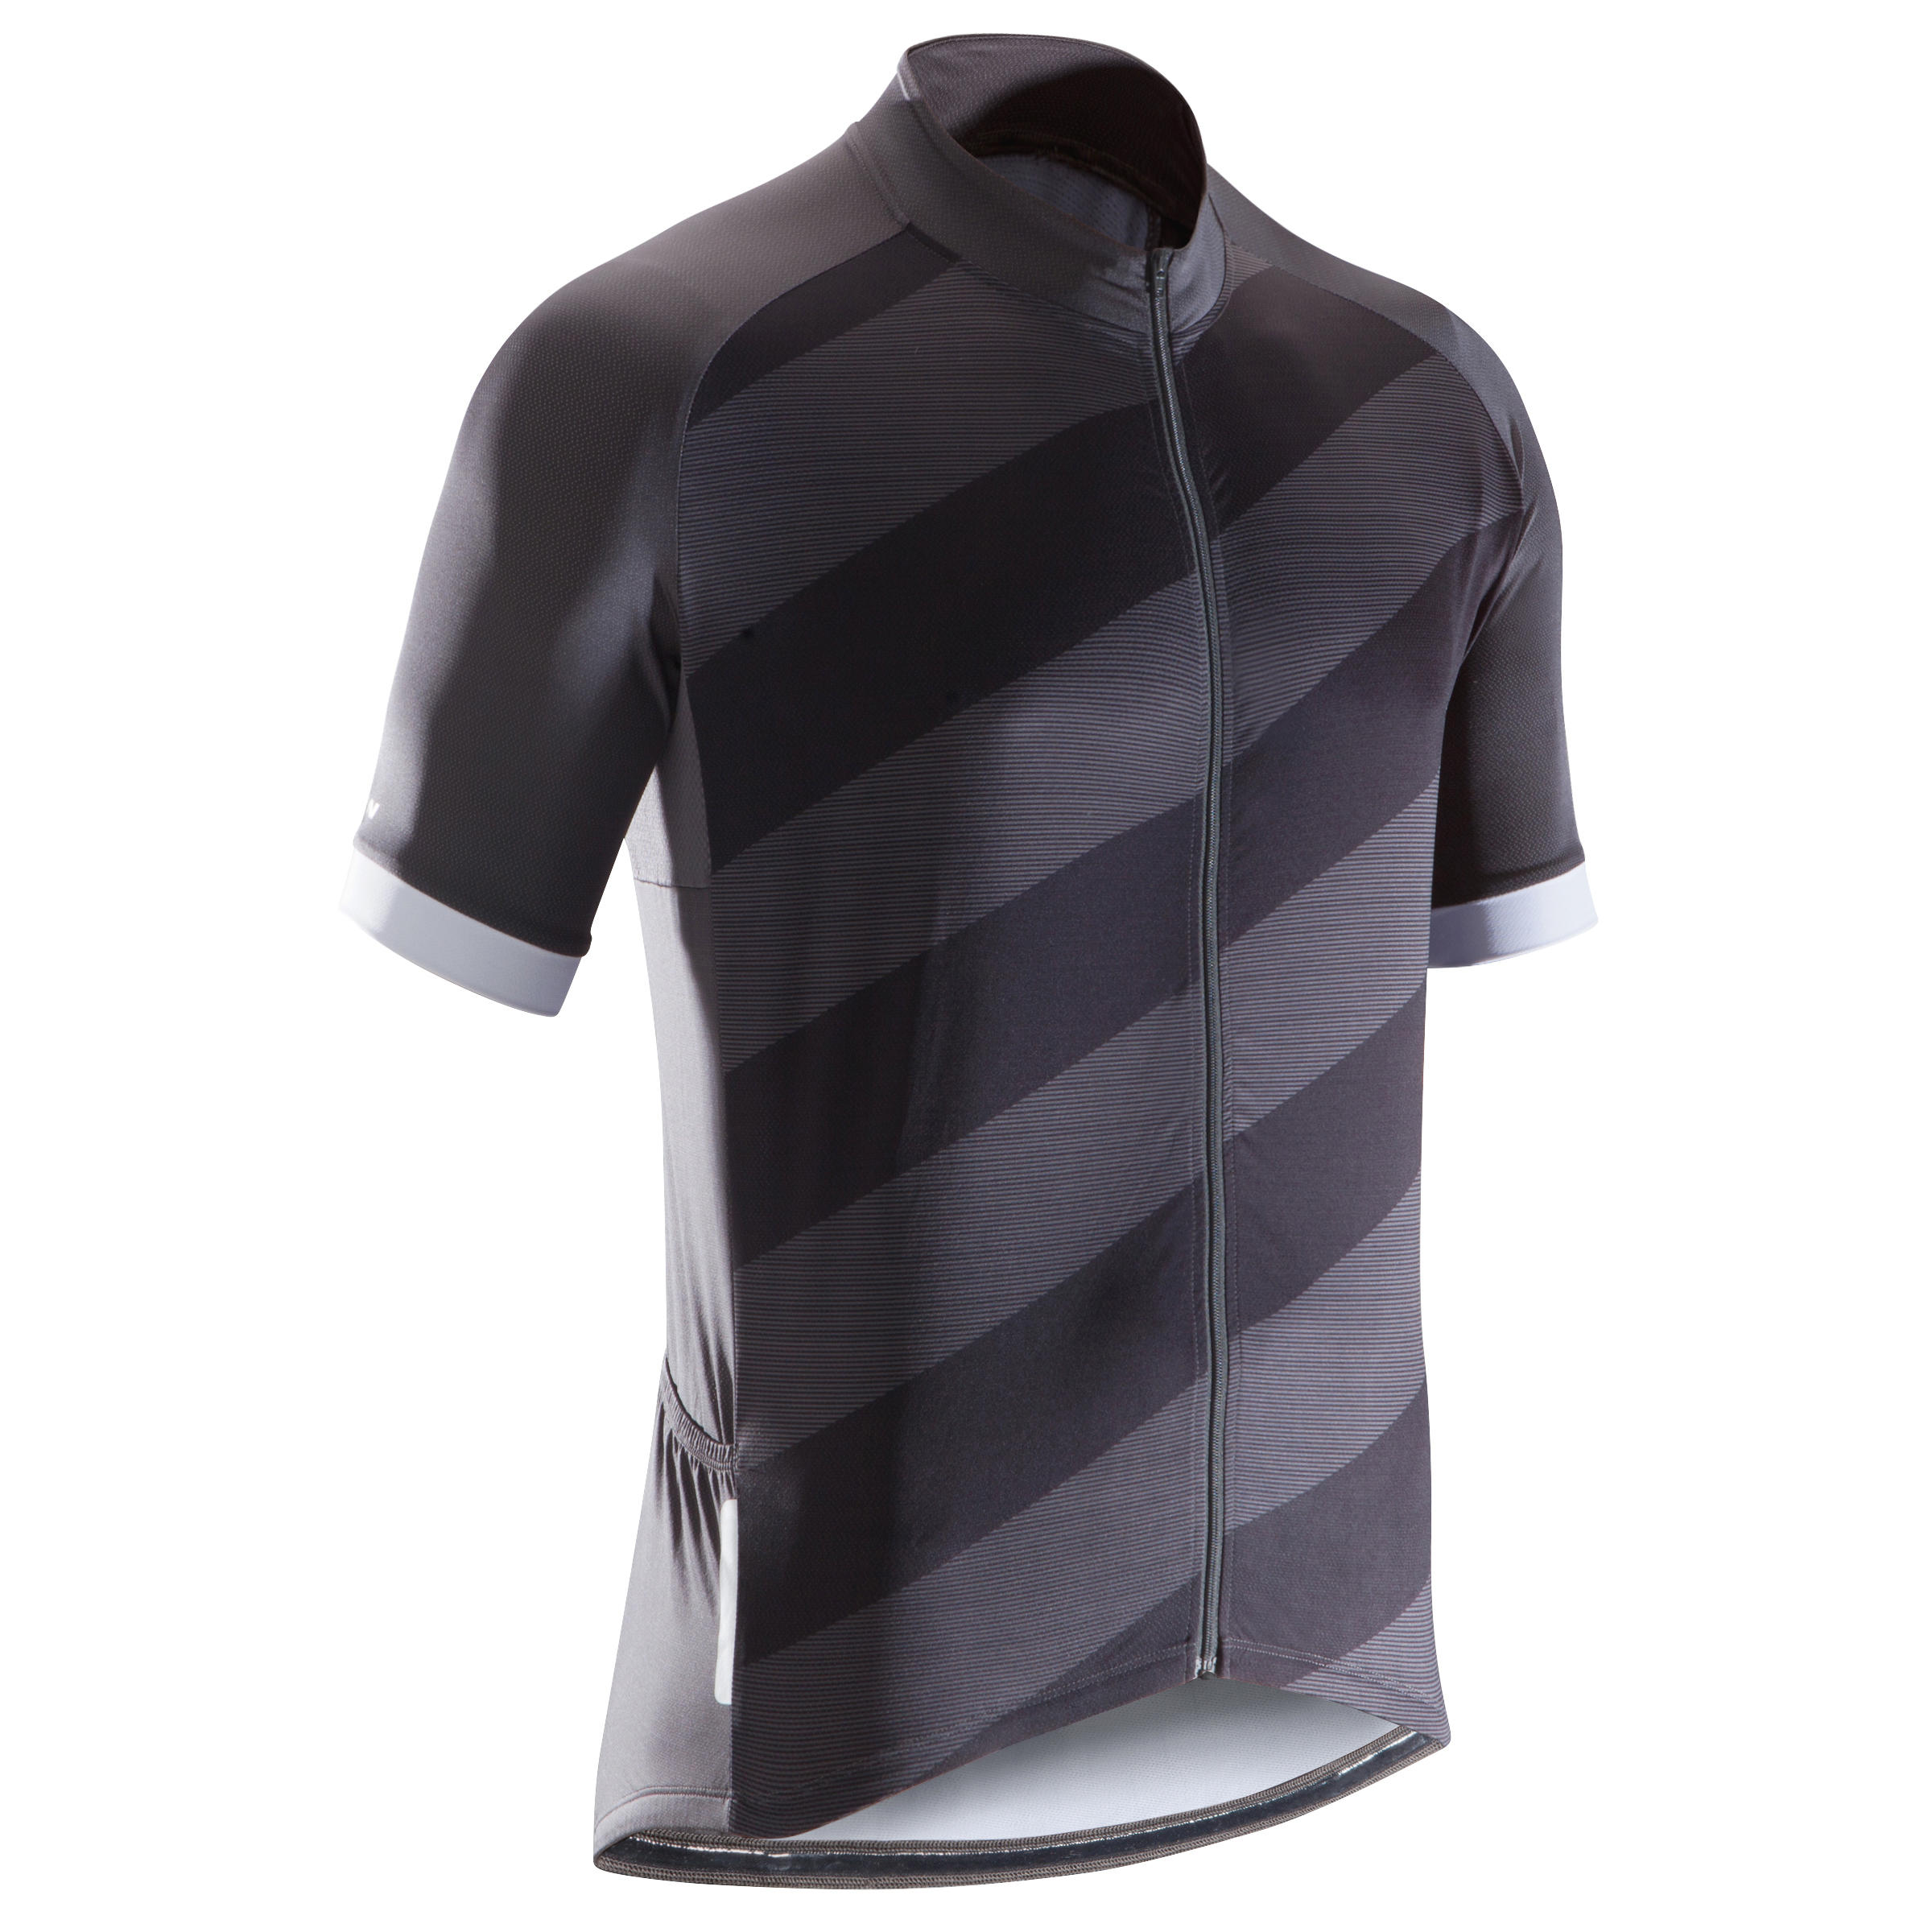 BTWIN 500 Short-Sleeved Road Cycling Jersey - Black/Grey